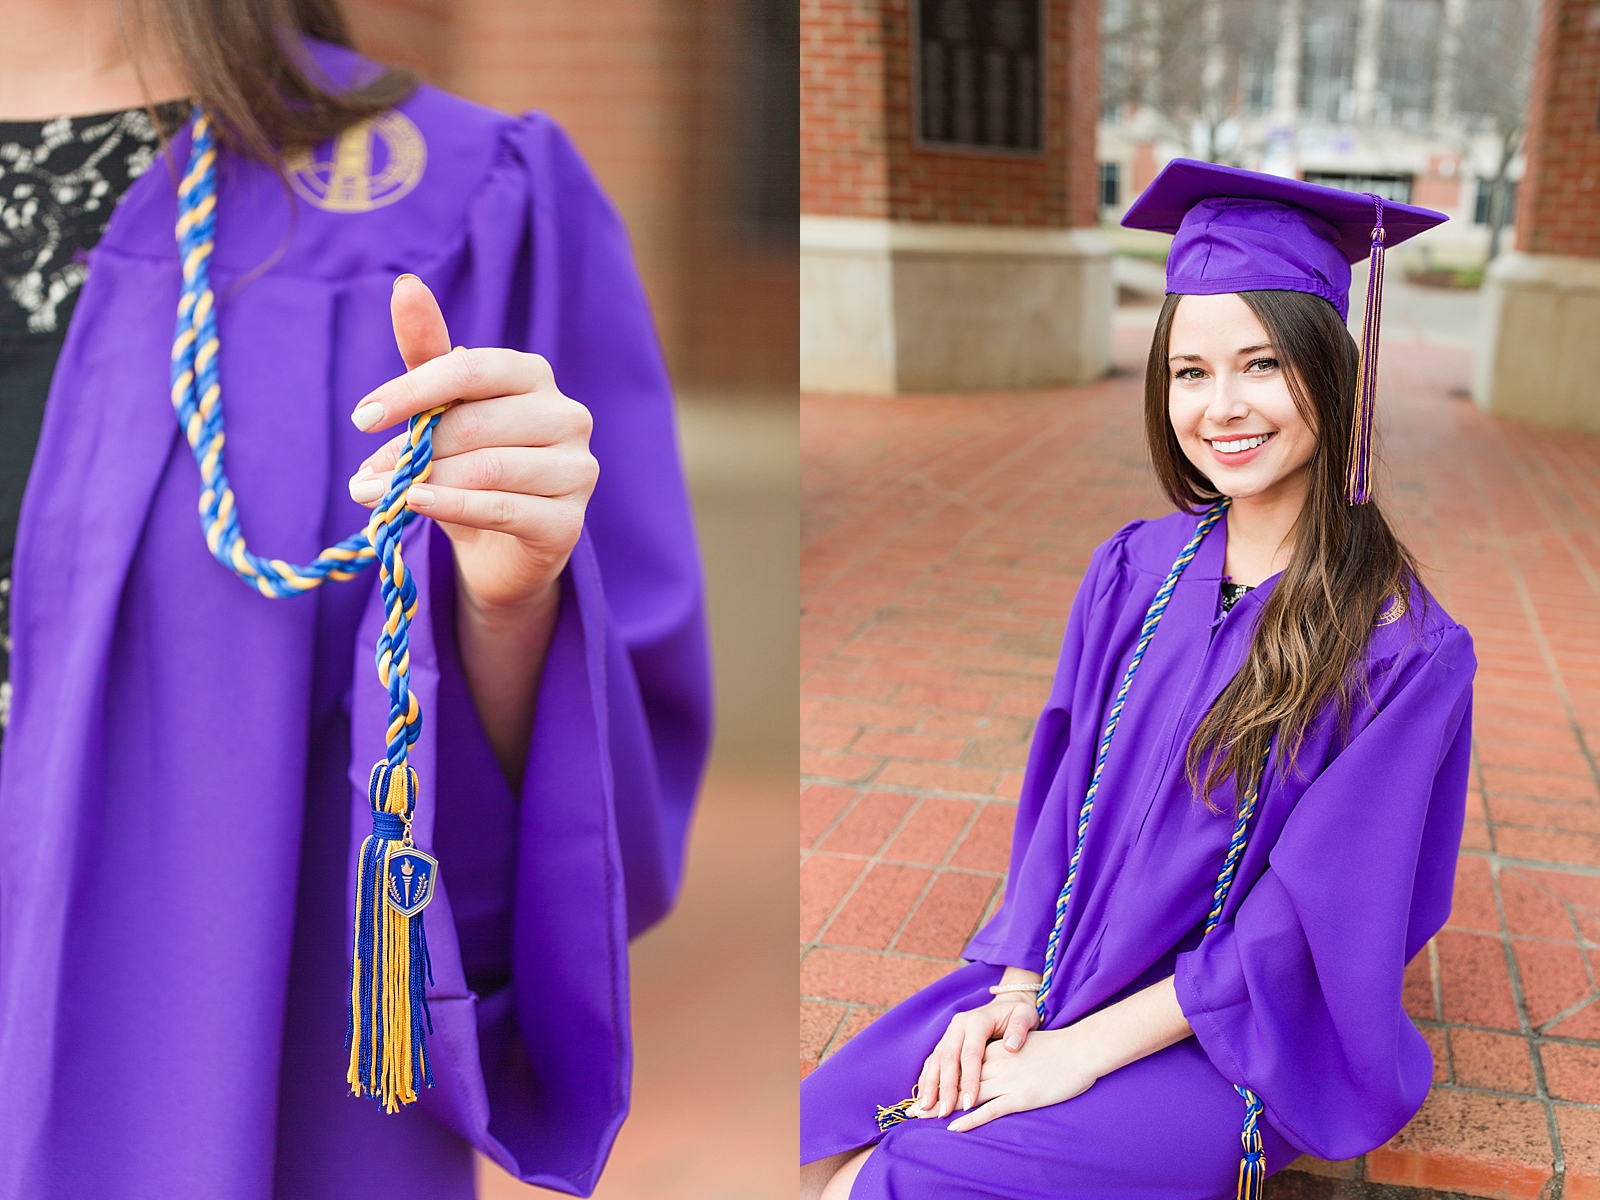 Western Carolina University Senior Sierra holding honors tassel and smiling in purple cap and gown Photos